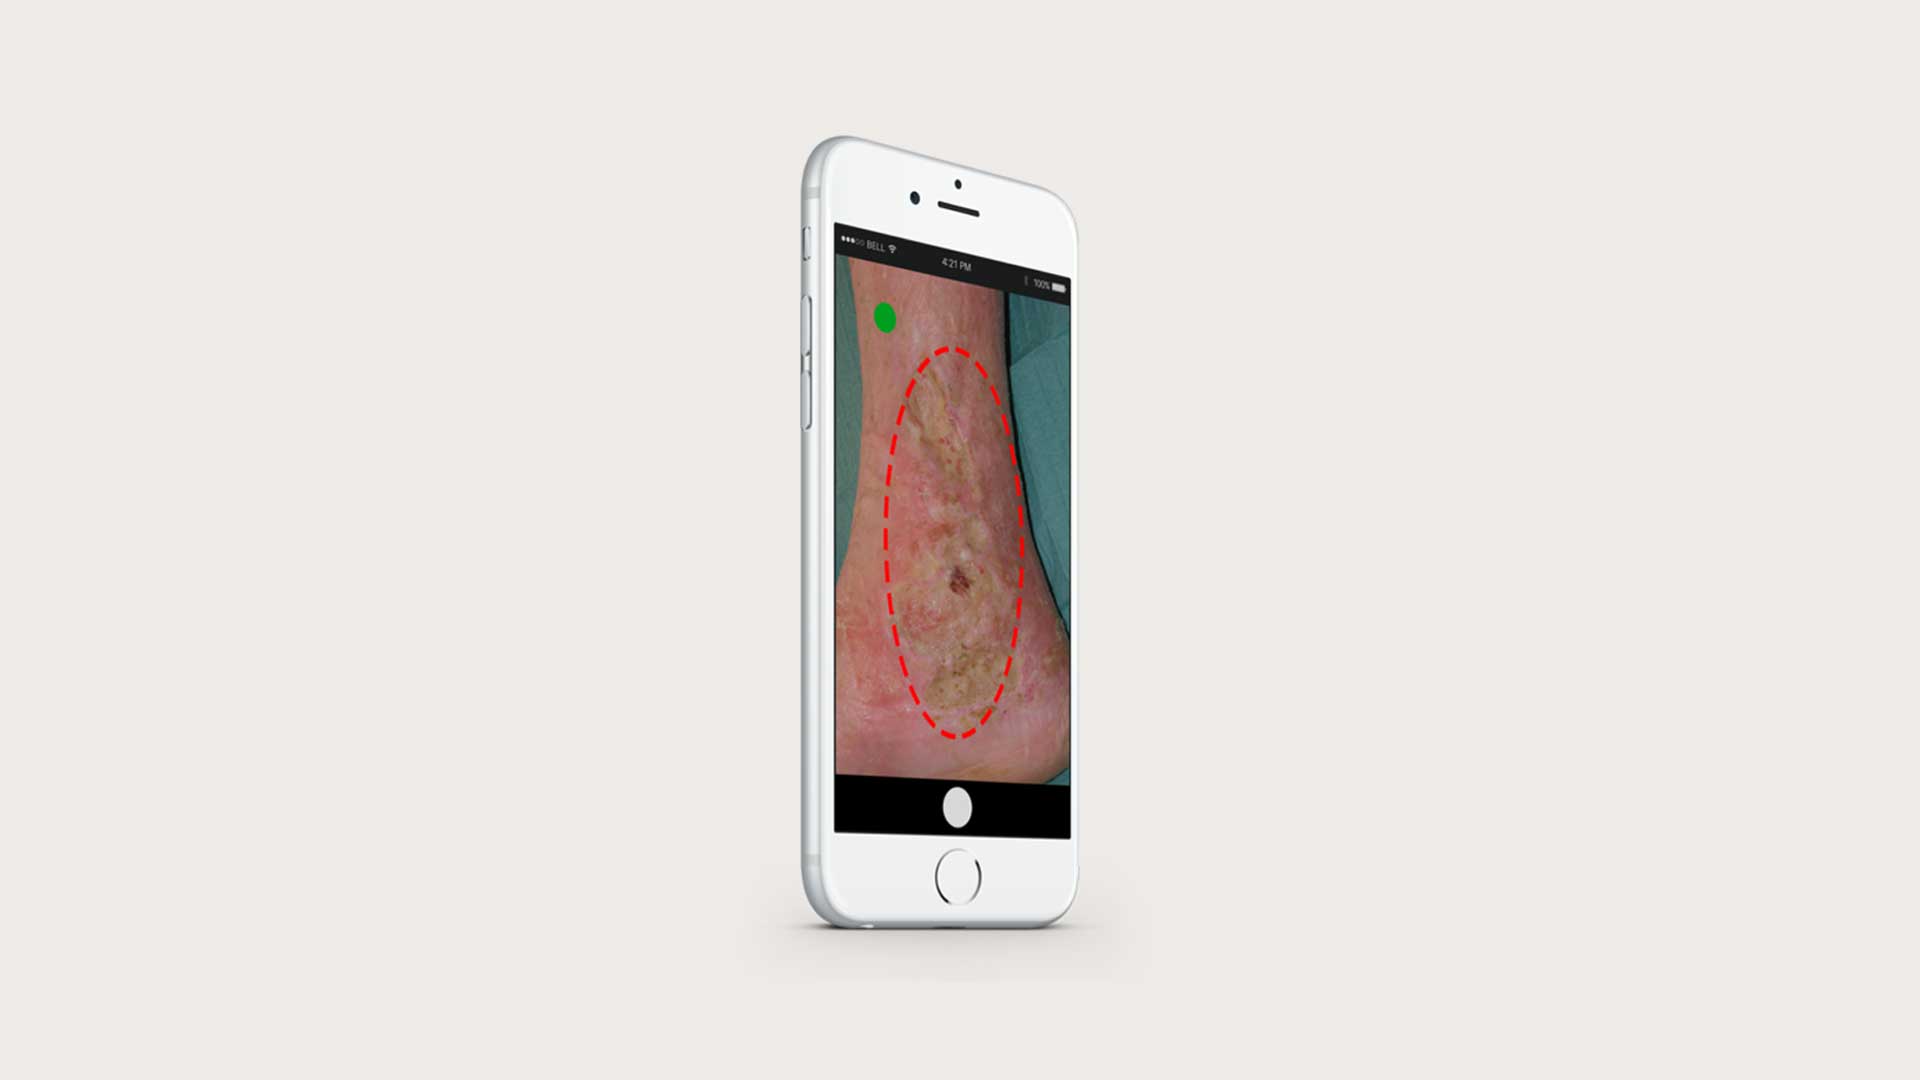 wound imaging app showing diabetic foot ulcer